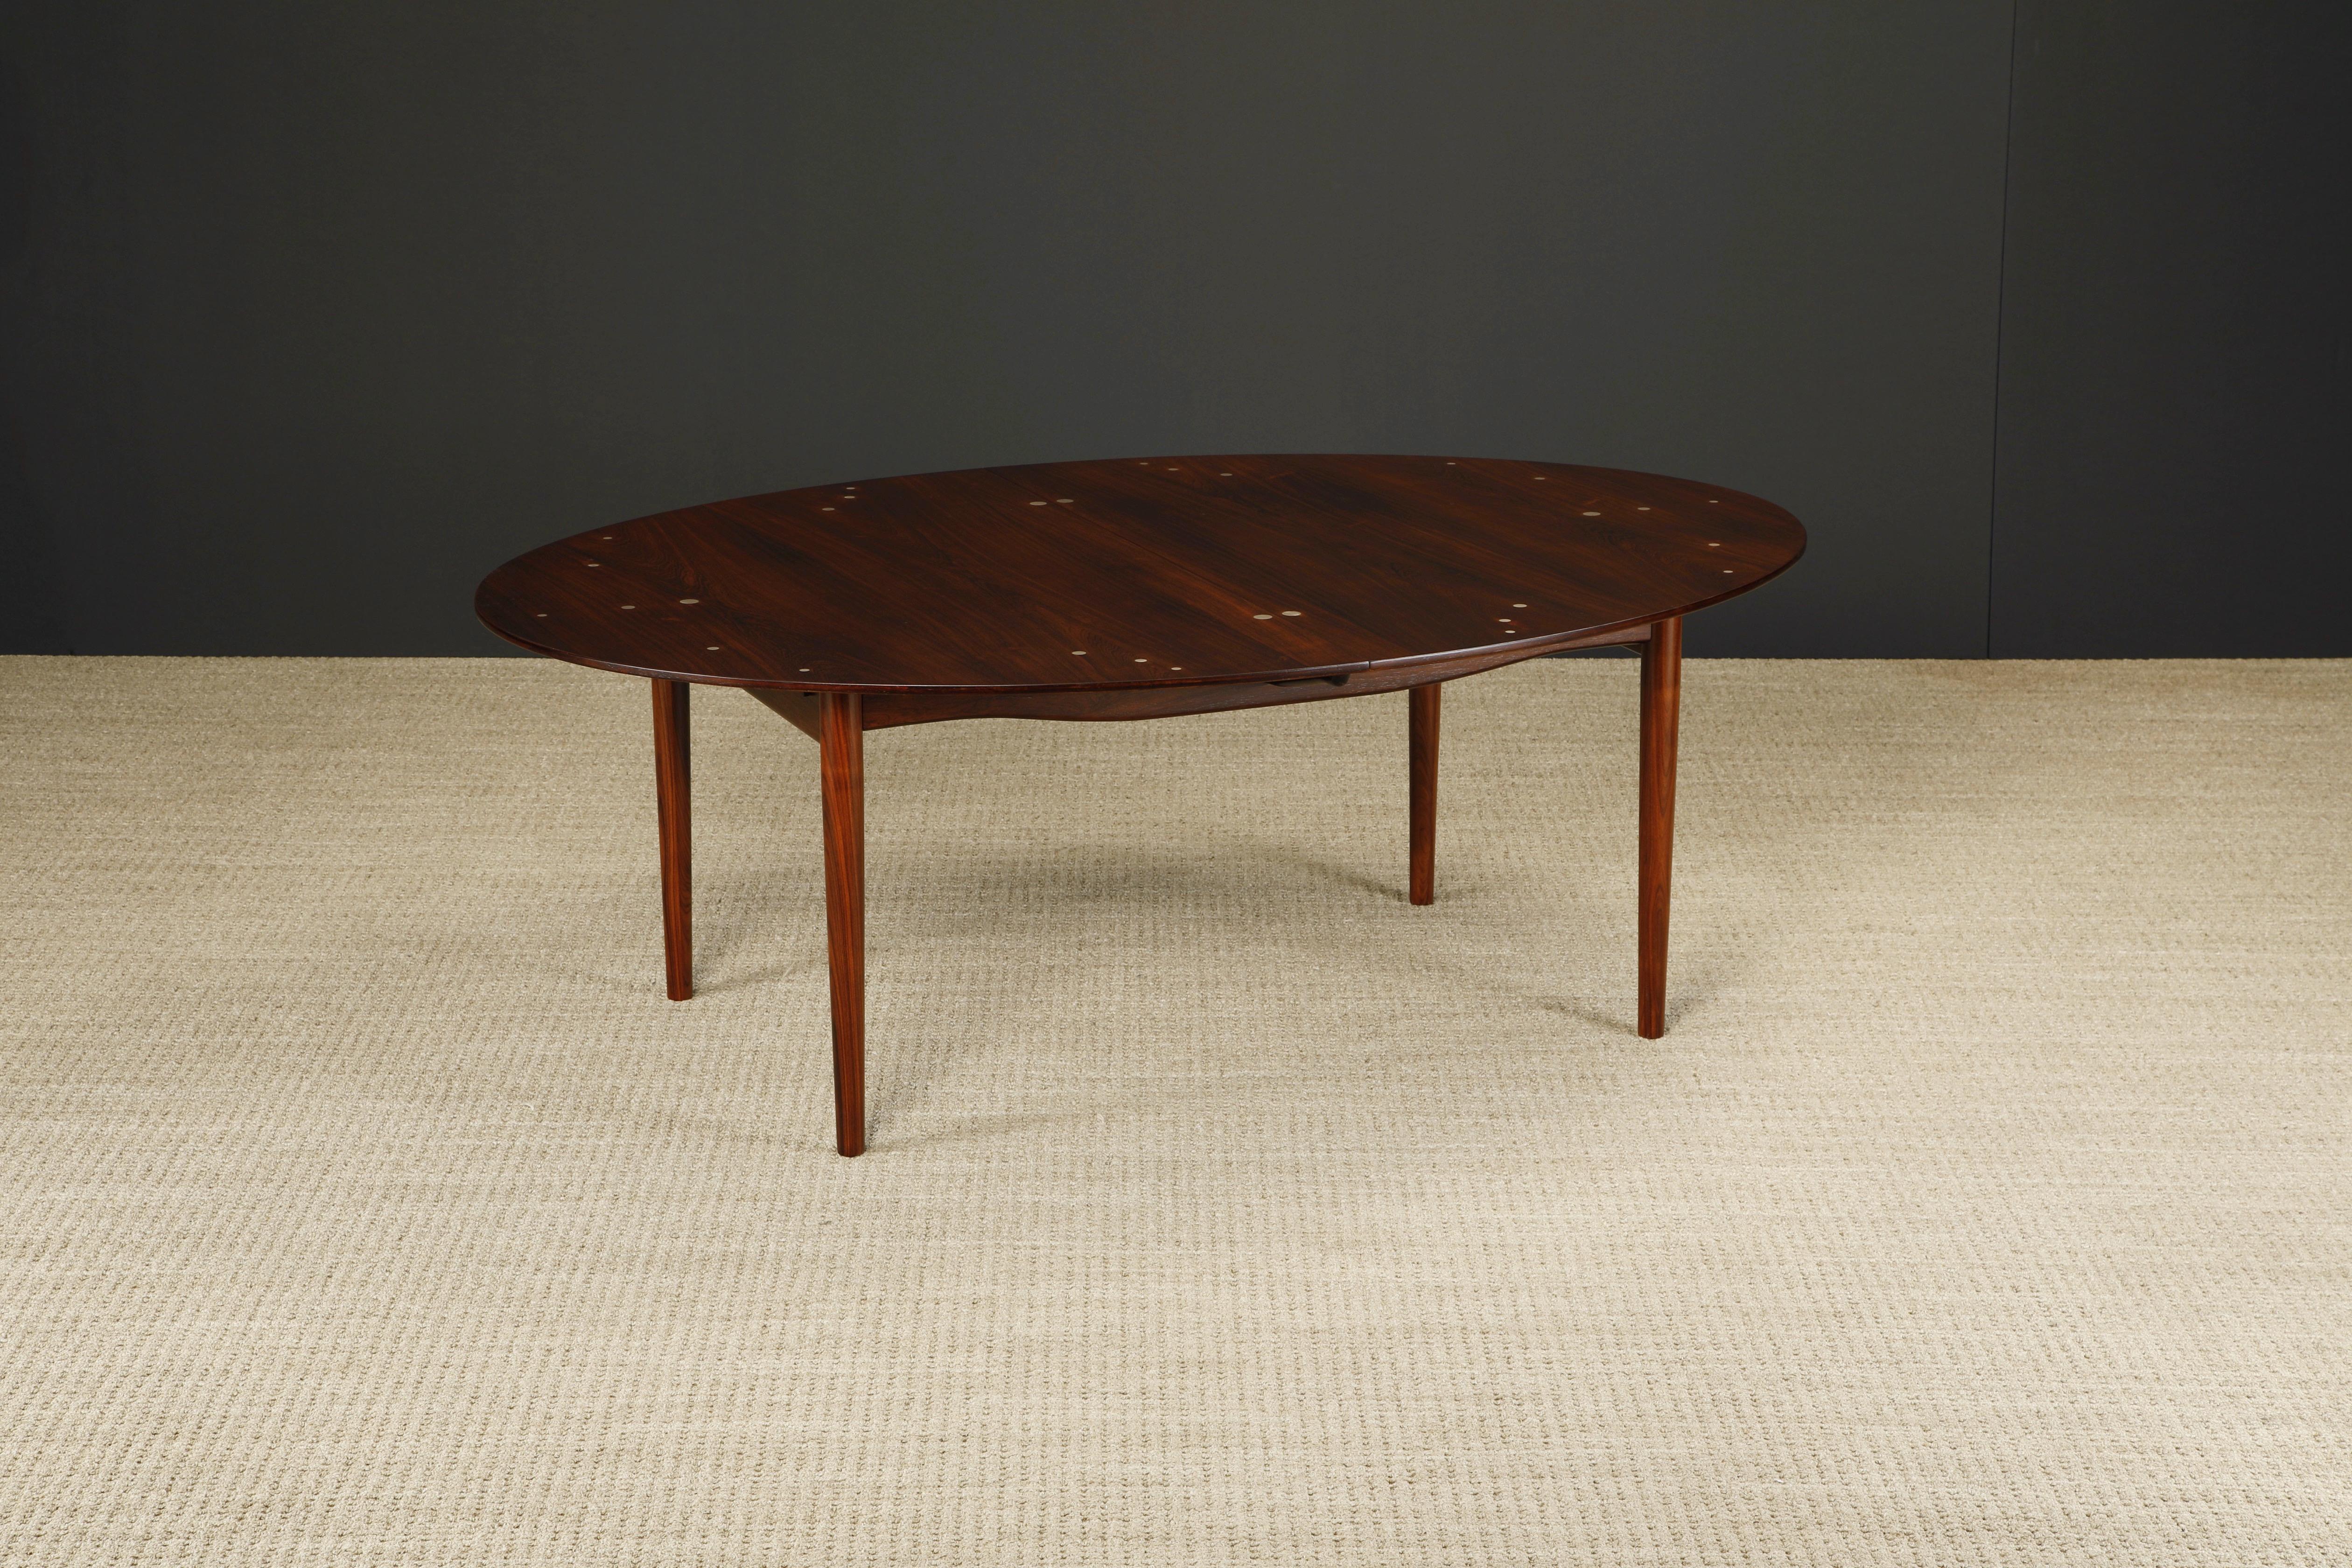 Finn Juhl 'Judas' Rosewood and Sterling Silver Dining Table, c 1950s, Signed For Sale 2